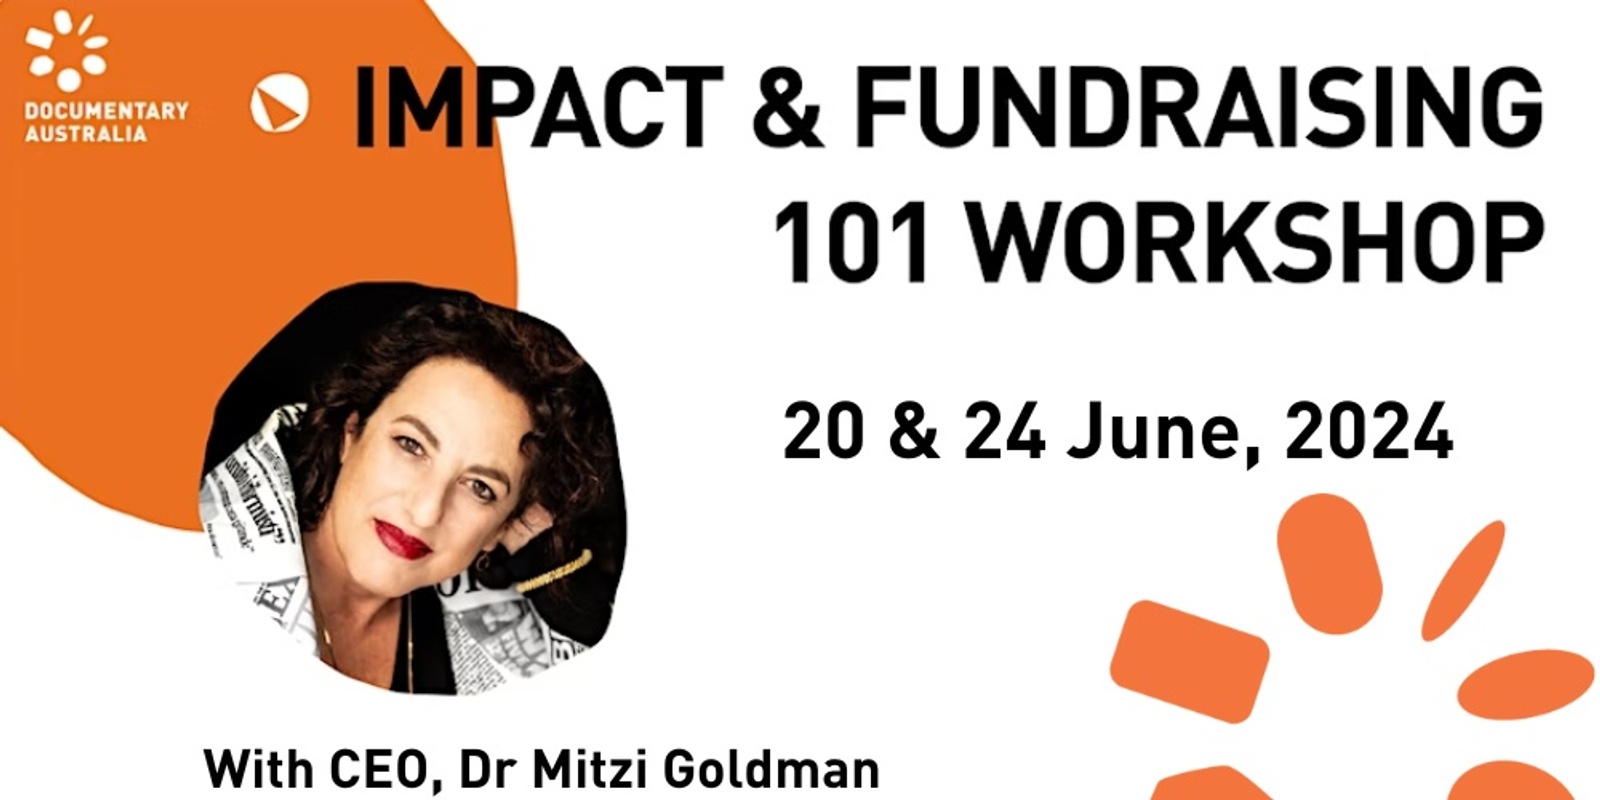 Banner image for Impact & Fundraising 101 for Documentary